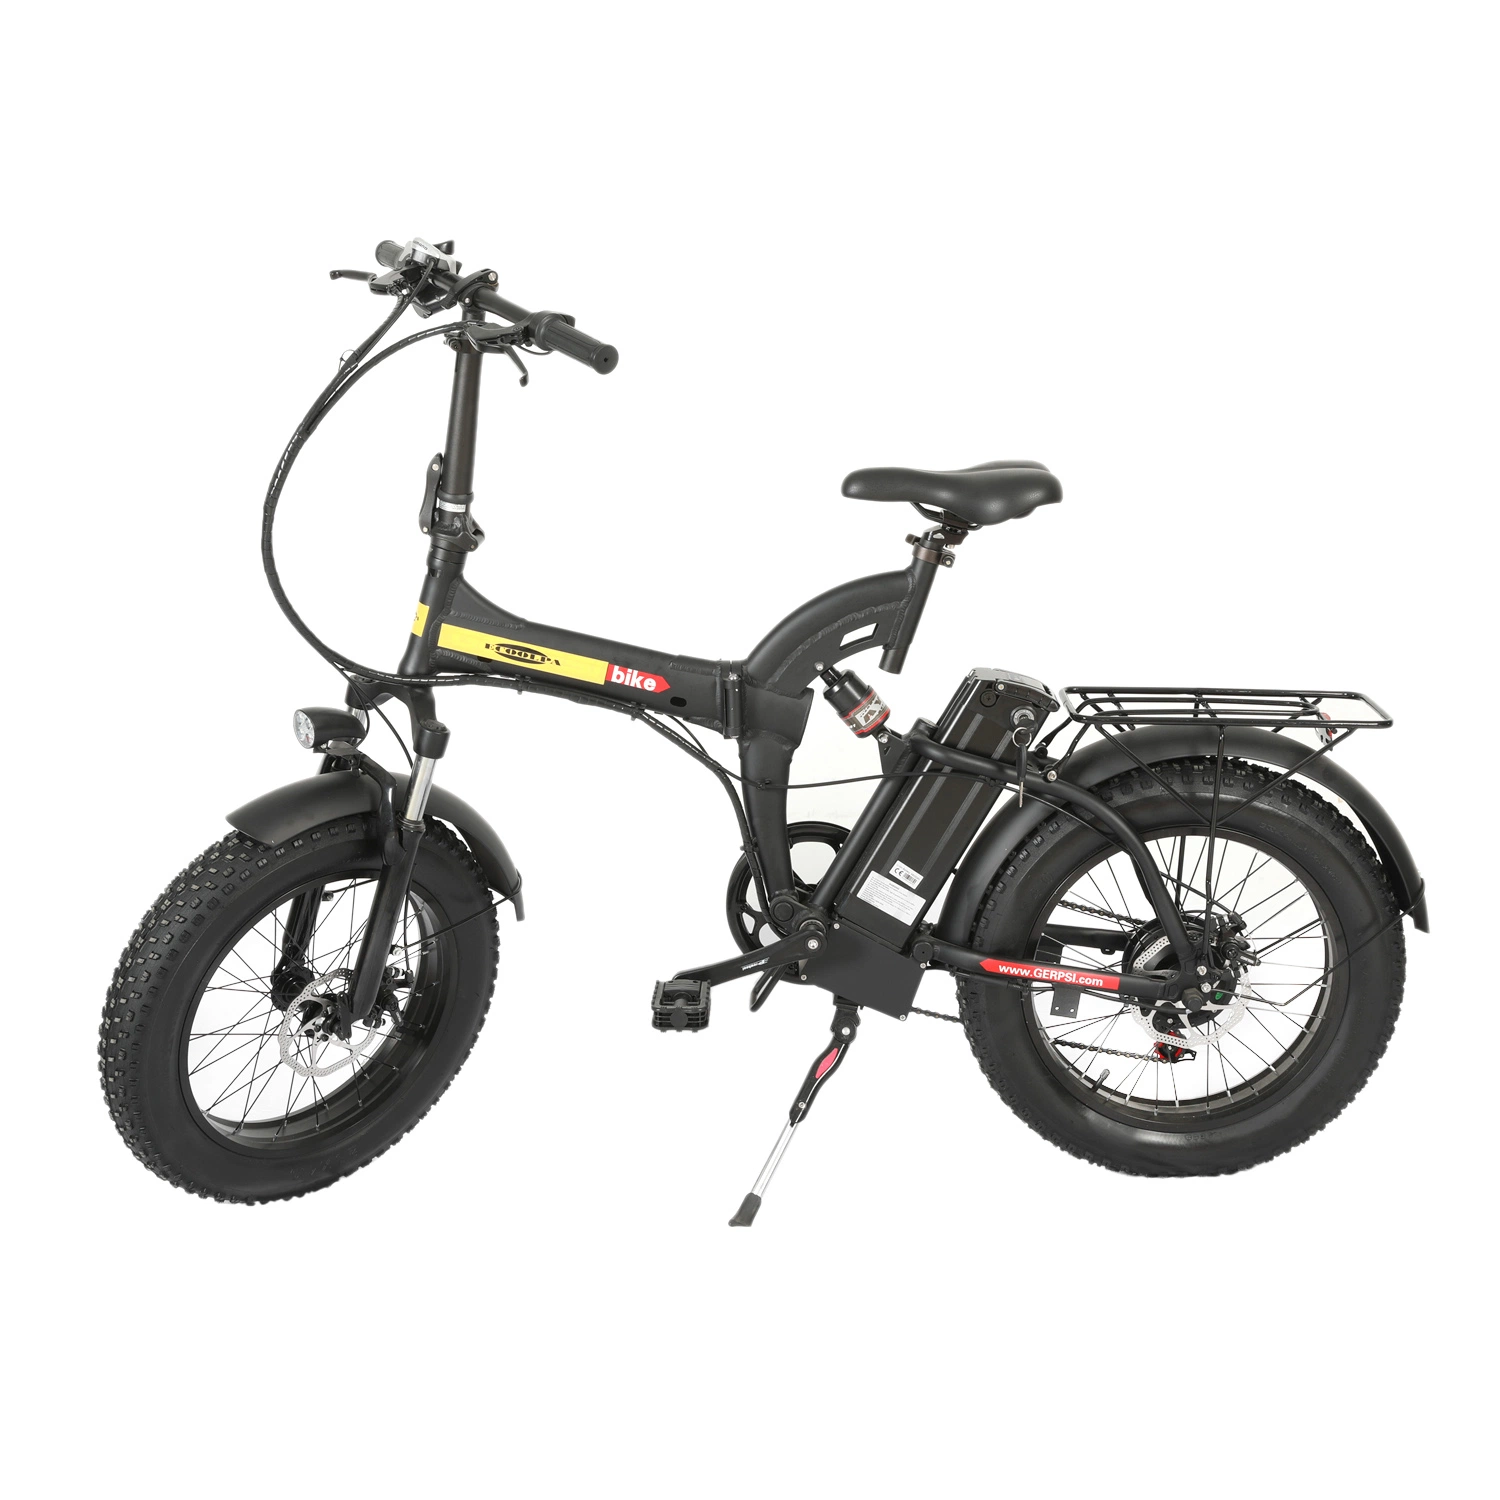 Motorcycle Electric Scooter Bicycle Electric Bike Electric Motorcycle Scooter Motor Scooter Duild in Battery Power Motor Aluminum Electric Hybrid Bike